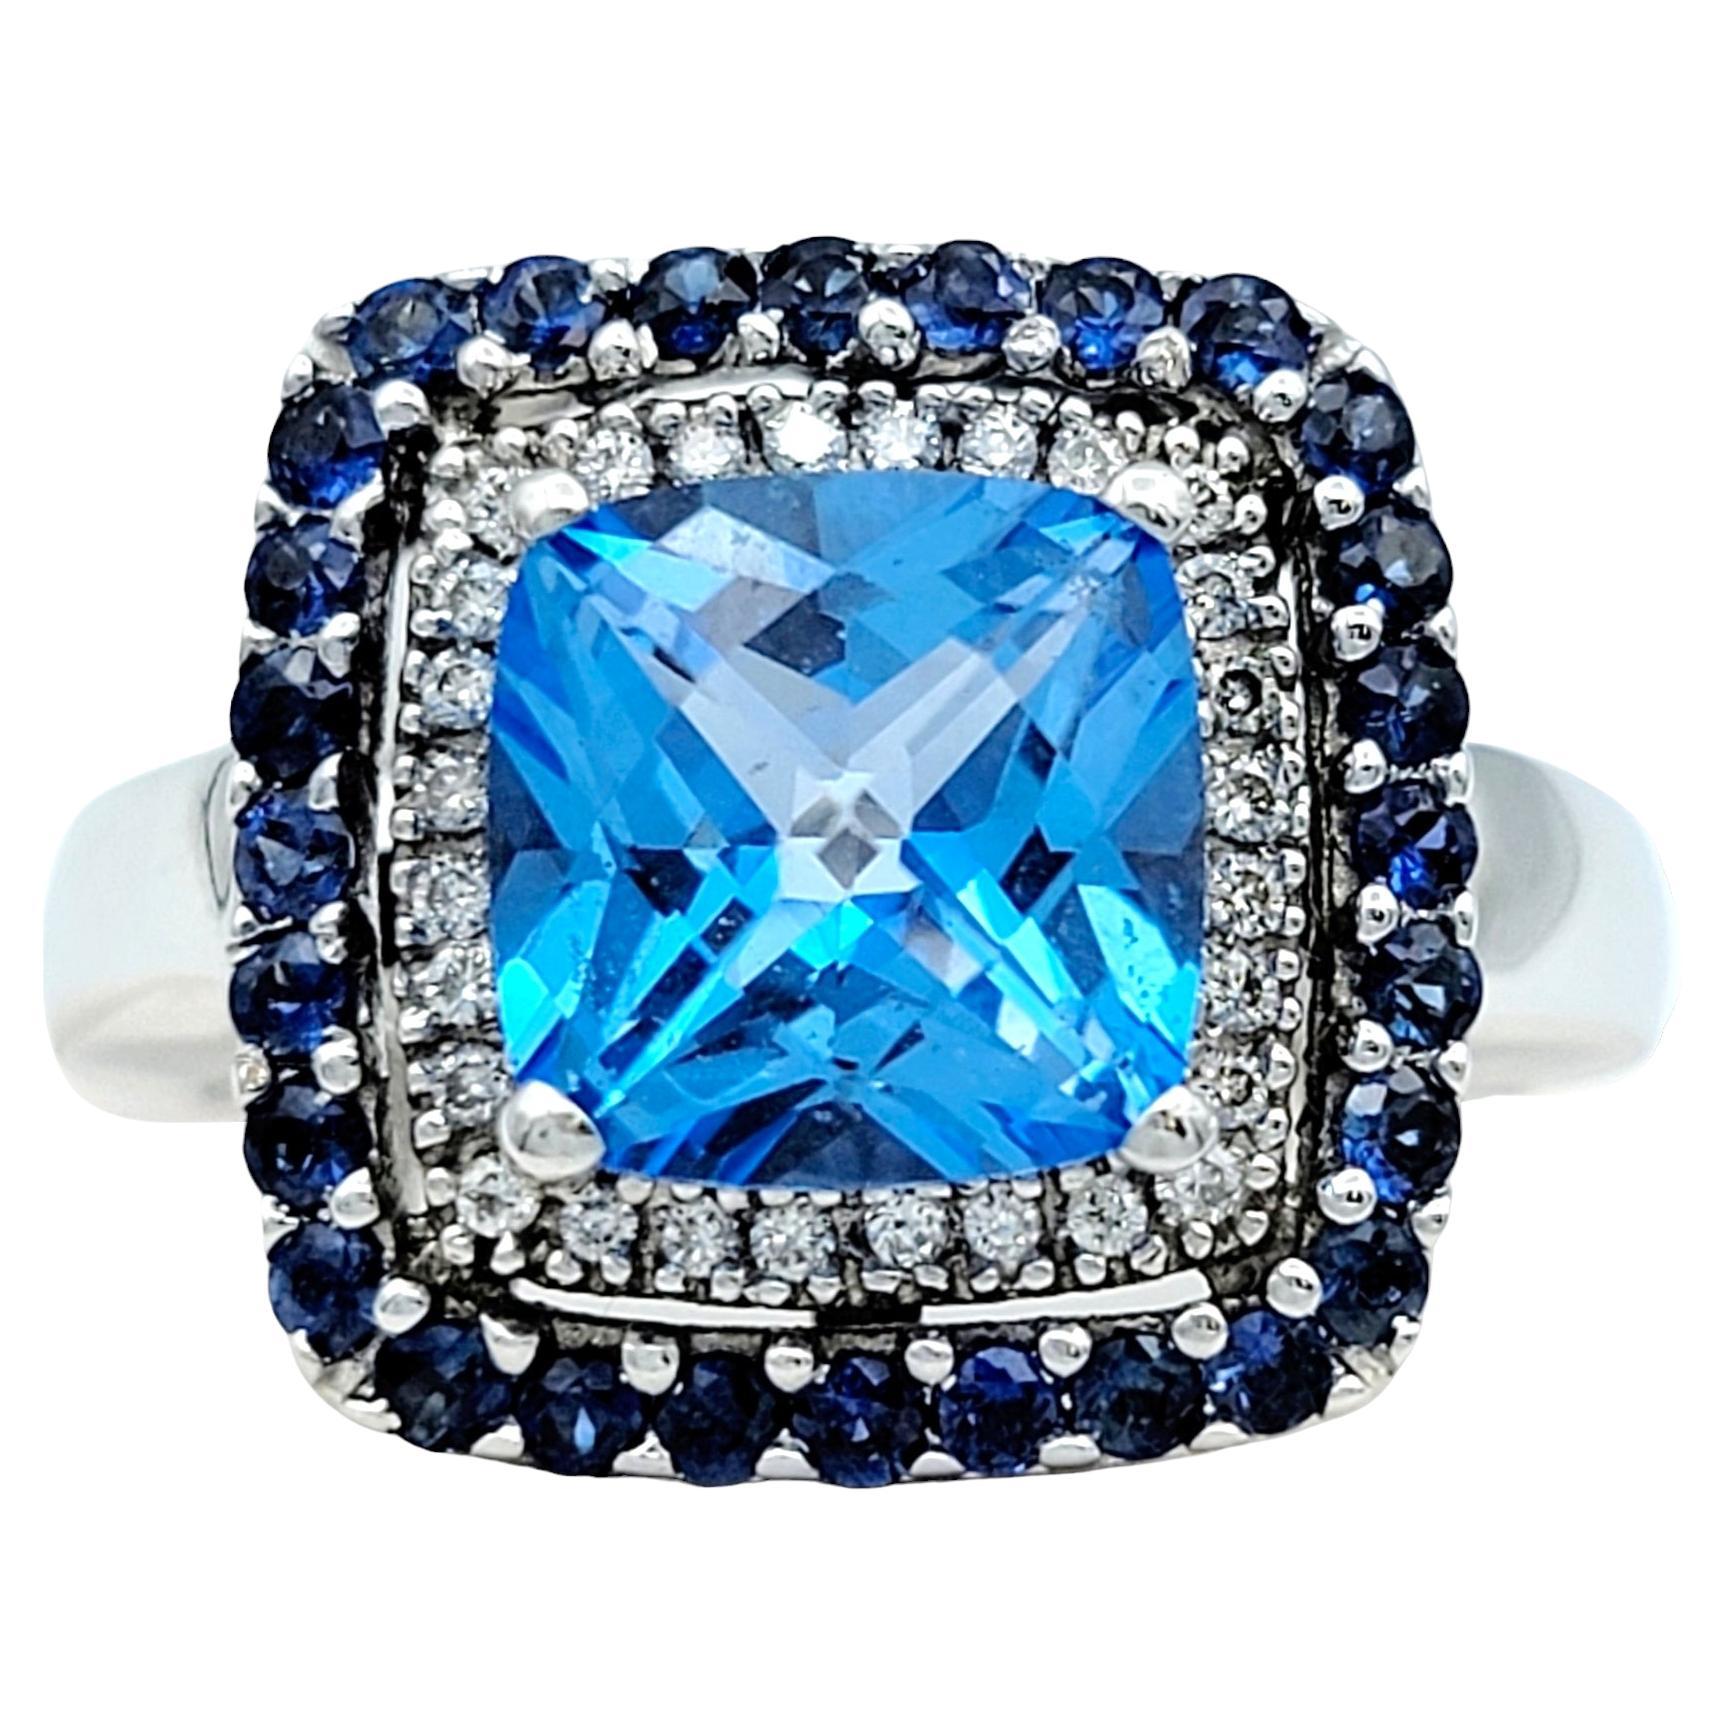 Le Vian Blue Topaz, Sapphire and Diamond Halo Cocktail Ring Set in 14 Karat Gold